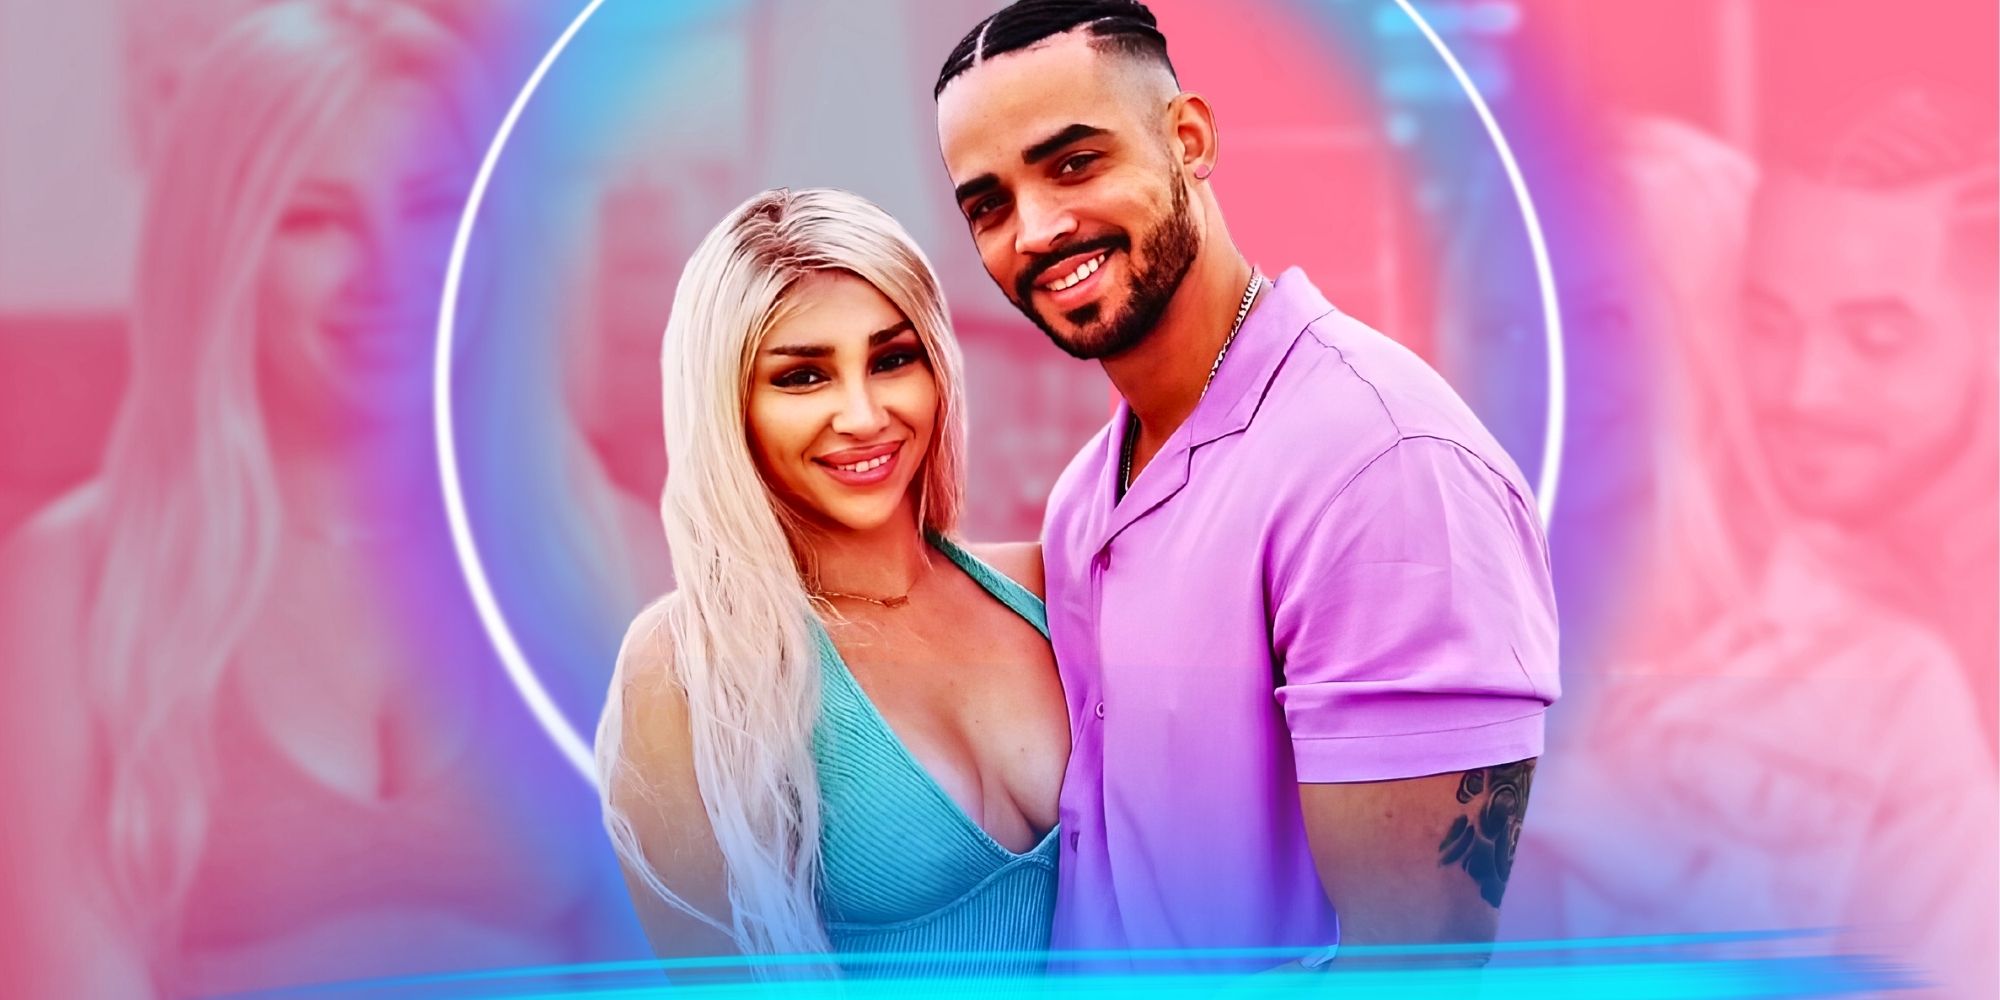 Montage of 90 Day Fiancé’s Sophie & Rob smiling in montage with pink background